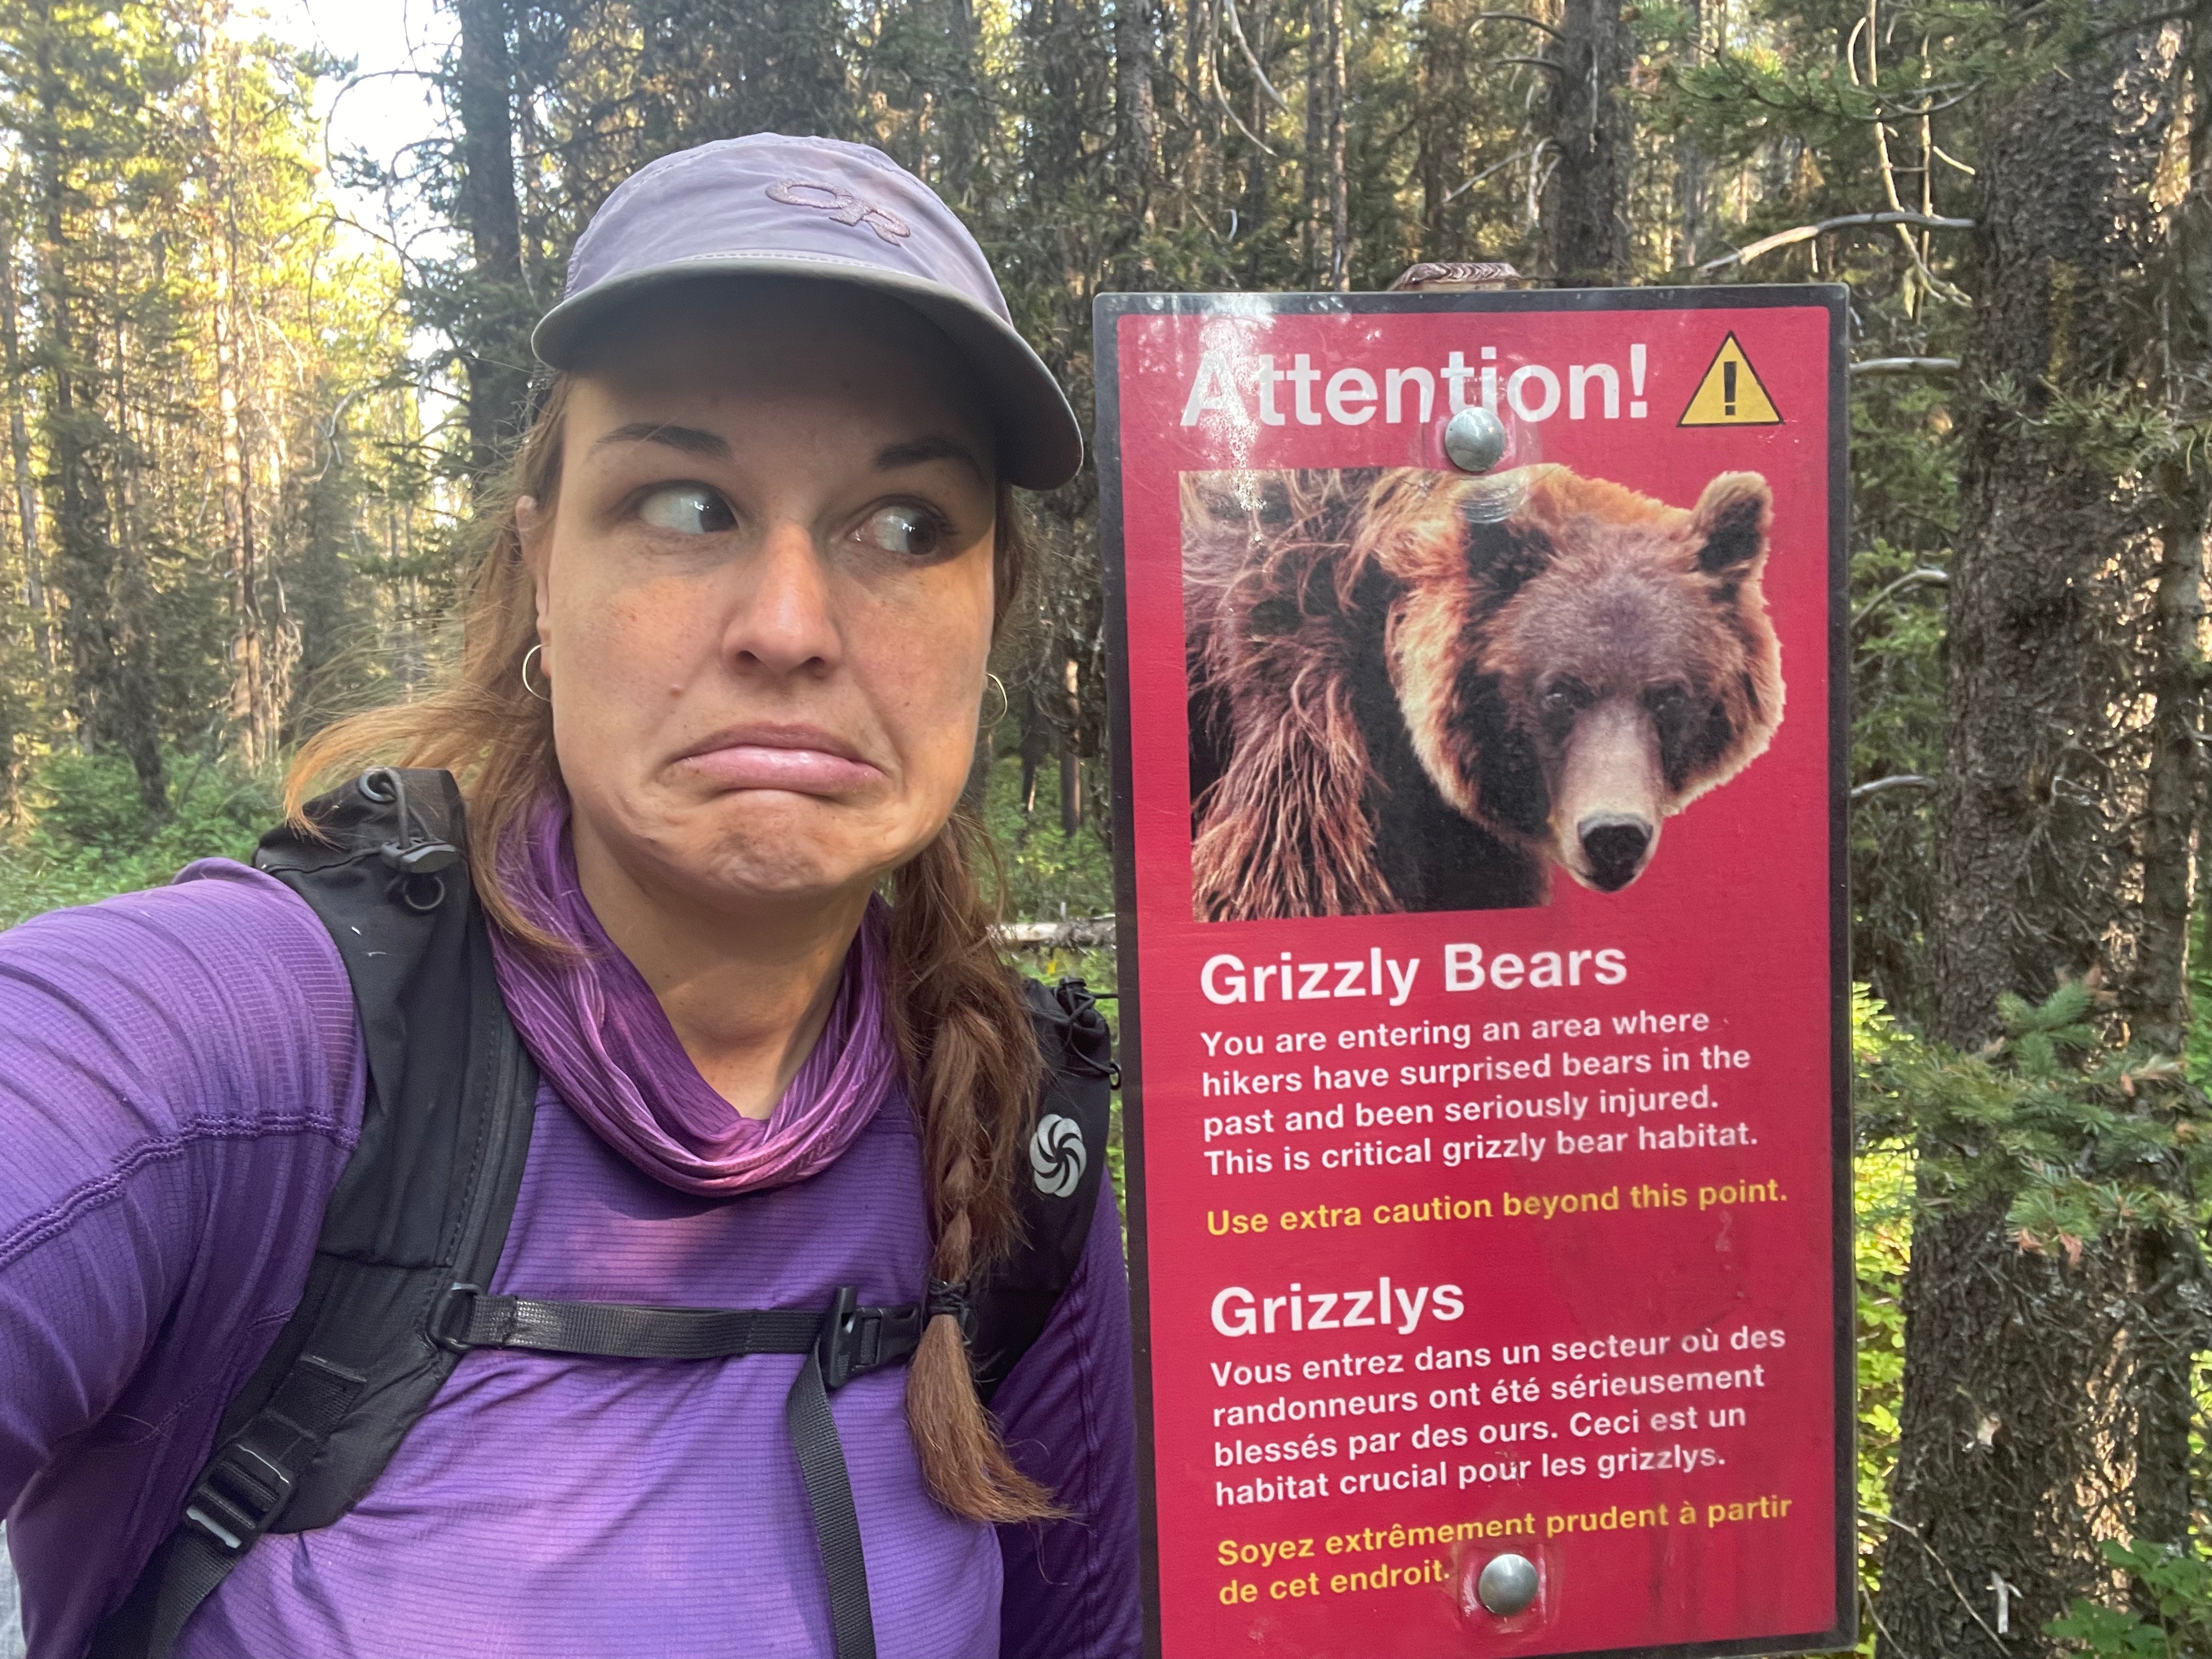 A hiker with a big frown on their face standing next to a sign warning about grizzly bears